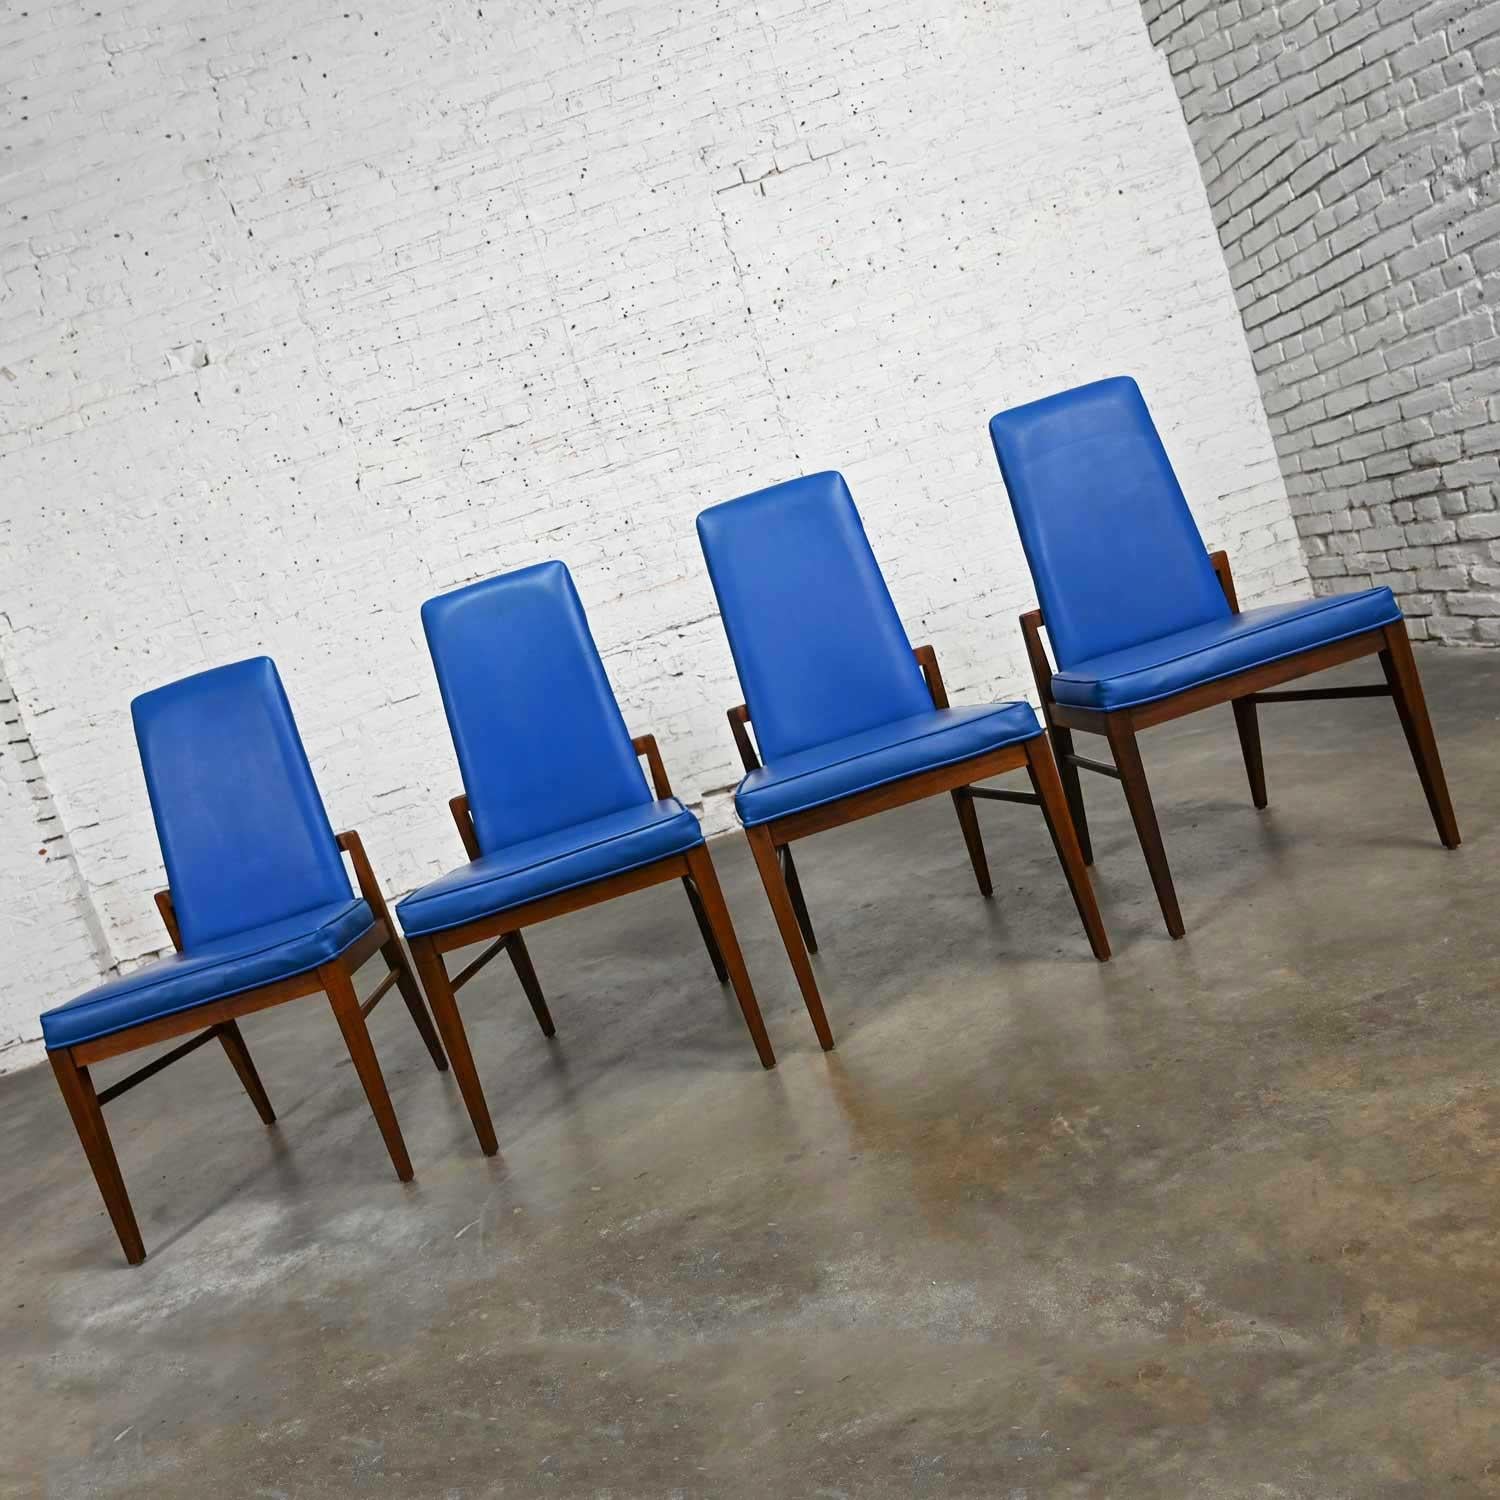 Stunning vintage Mid-Century Modern Foster-McDavid dining chairs set of 4 comprised of walnut frames and the original cobalt blue faux leather upholstery. Beautiful condition, keeping in mind that this is vintage and not new so will have signs of